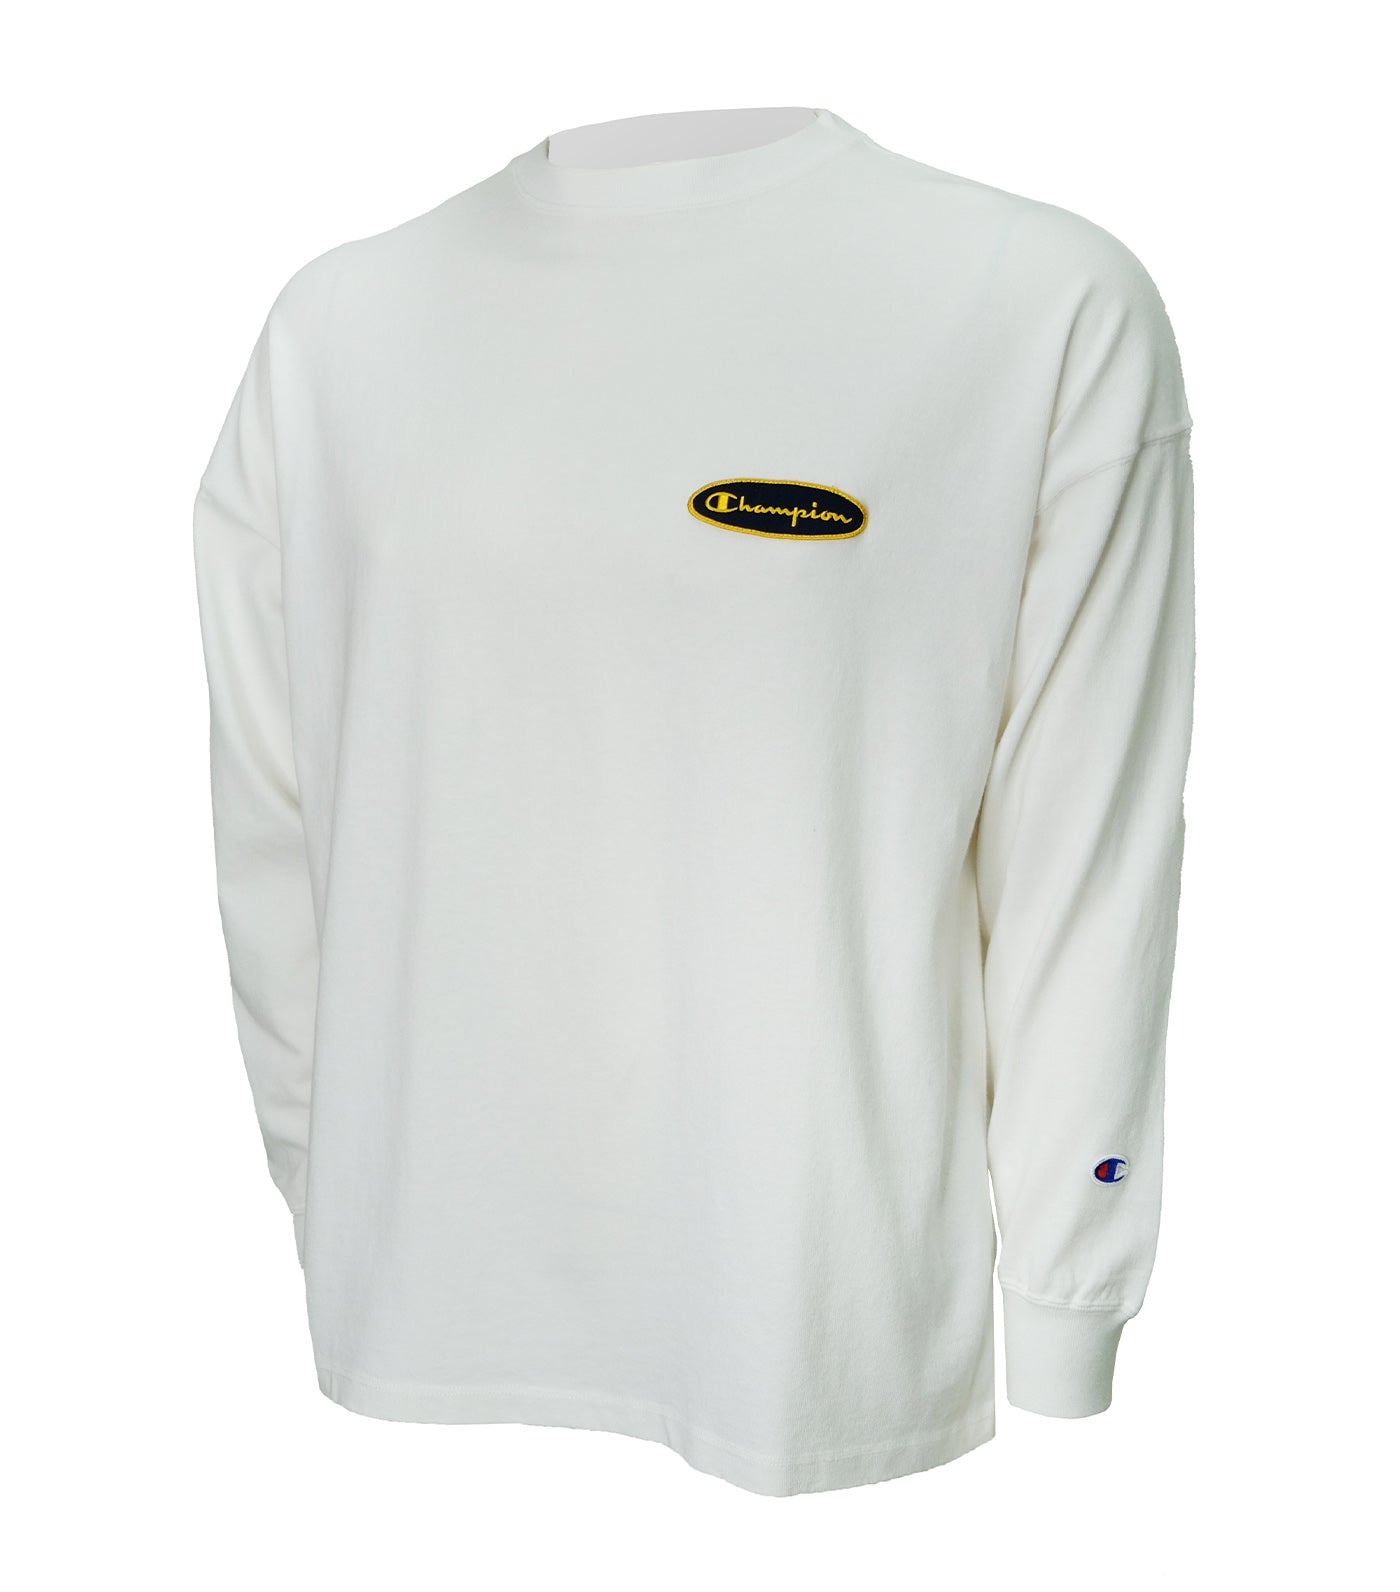 Japan Line Long-Sleeved T-Shirt Patch White